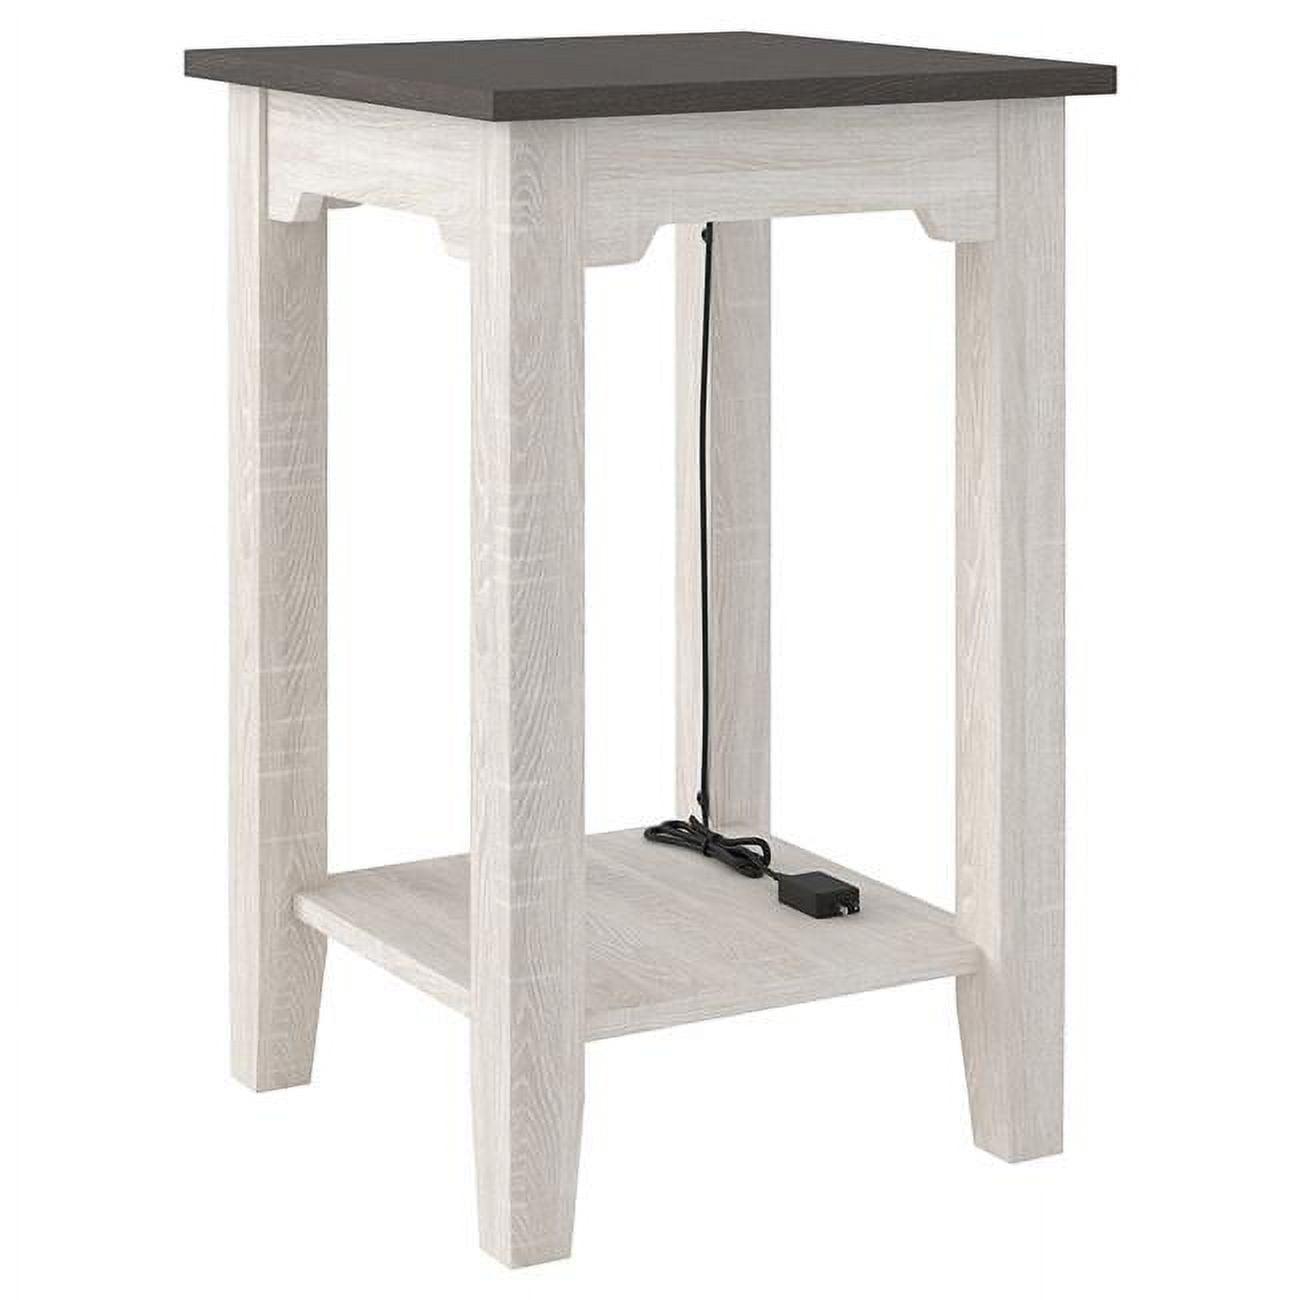 Antique White and Gray Wooden Square Side Table with USB Ports